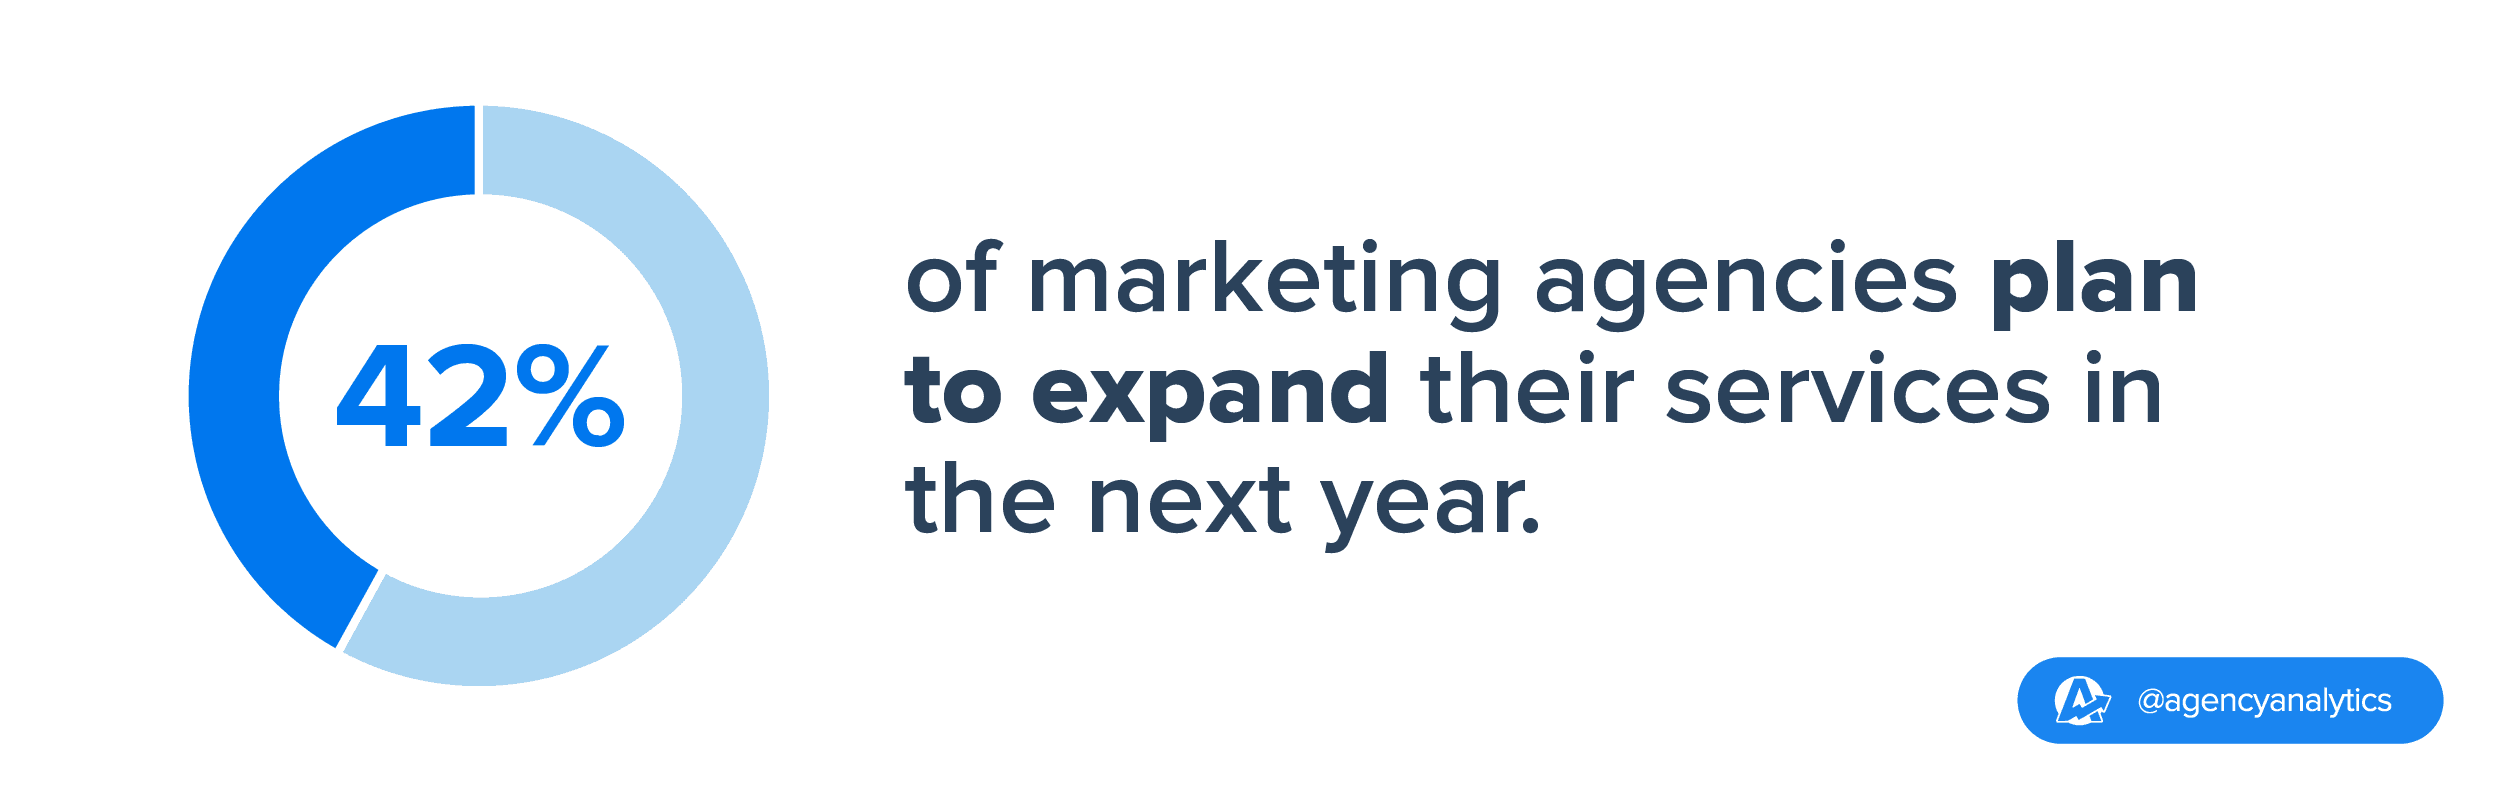 42% of marketing agencies plan to expand their service offerings next year